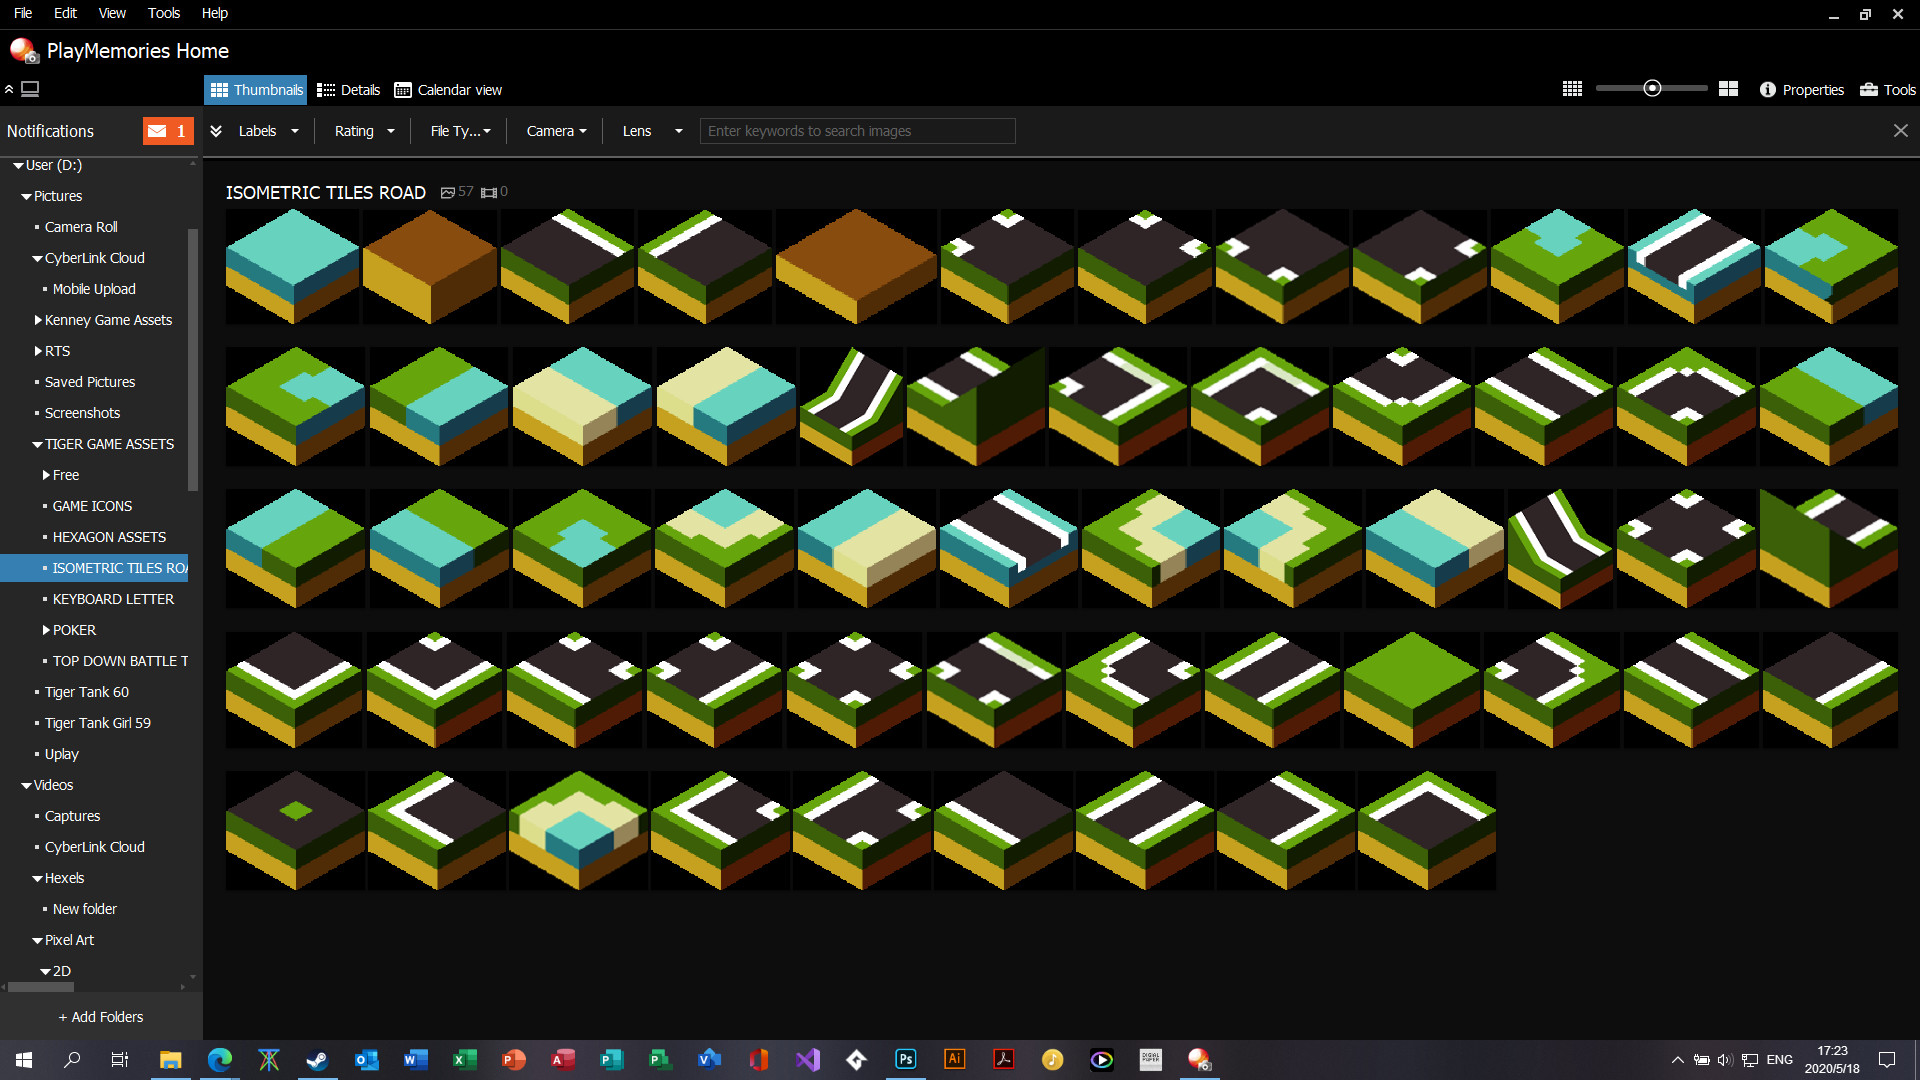 TIGER GAME ASSETS ISOMETRIC TILES ROAD Featured Screenshot #1